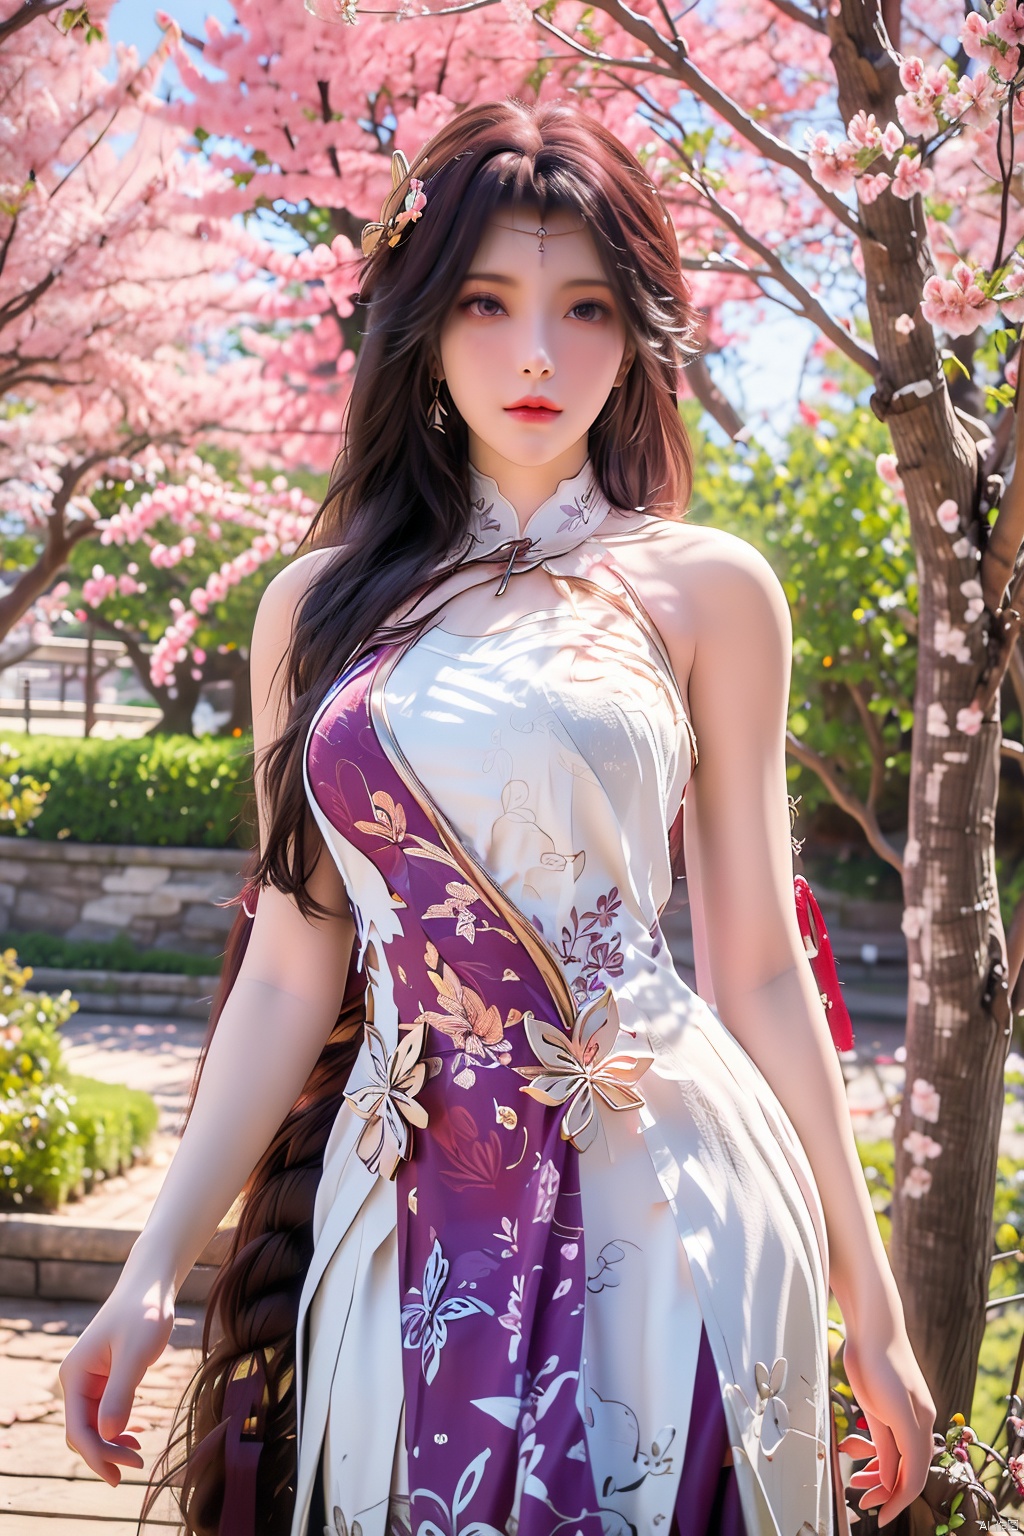  Real scene, 8K quality, super detail, beautiful and sexy girl, beautiful curve, perfect proportion, fair skin, necklace, full-length photos, colorful, various postures, flowers, gardens, flowers, cherry blossoms, roses.Tall and long-legged